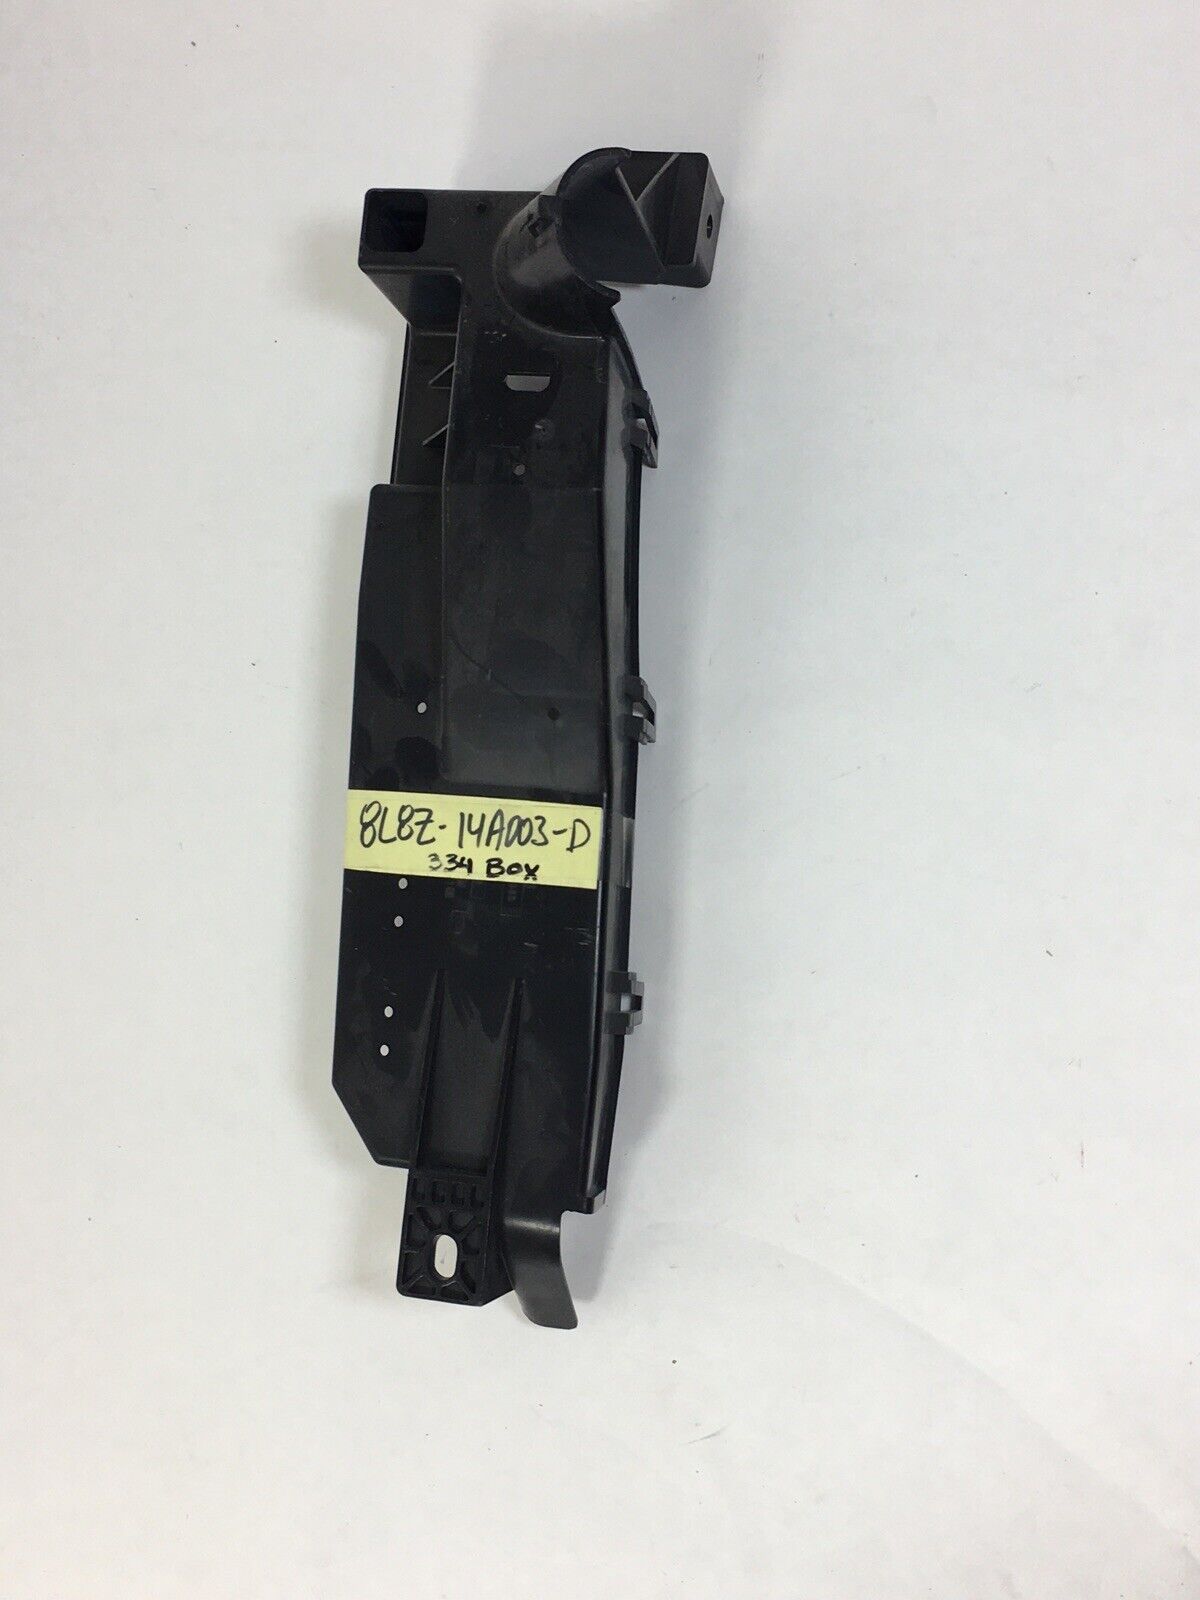 New OEM Ford Escape Fuse Box Bottom Panel 2008 8L8Z-14A003-D